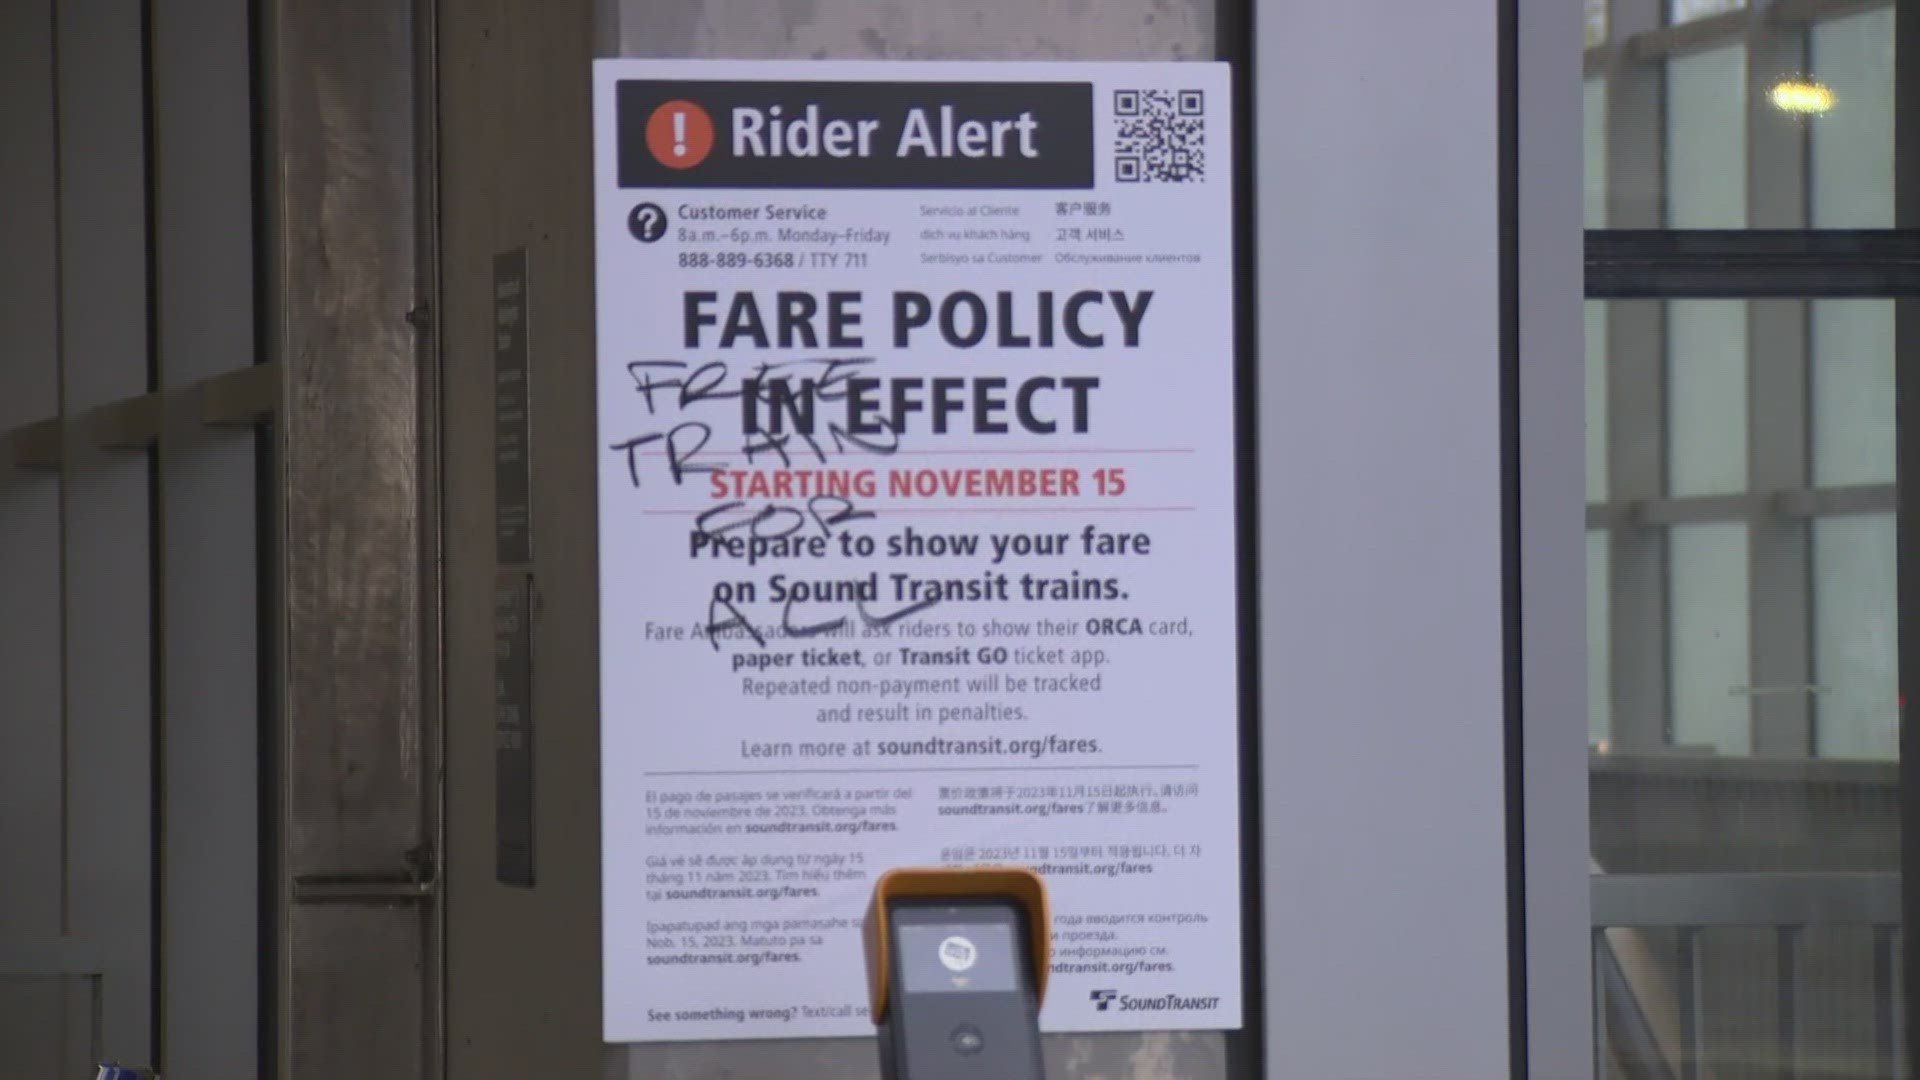 Starting on Nov. 15, there will be consequences for people who choose to not tap their Orca card. The new fare compliance policy is being met with mixed reactions.